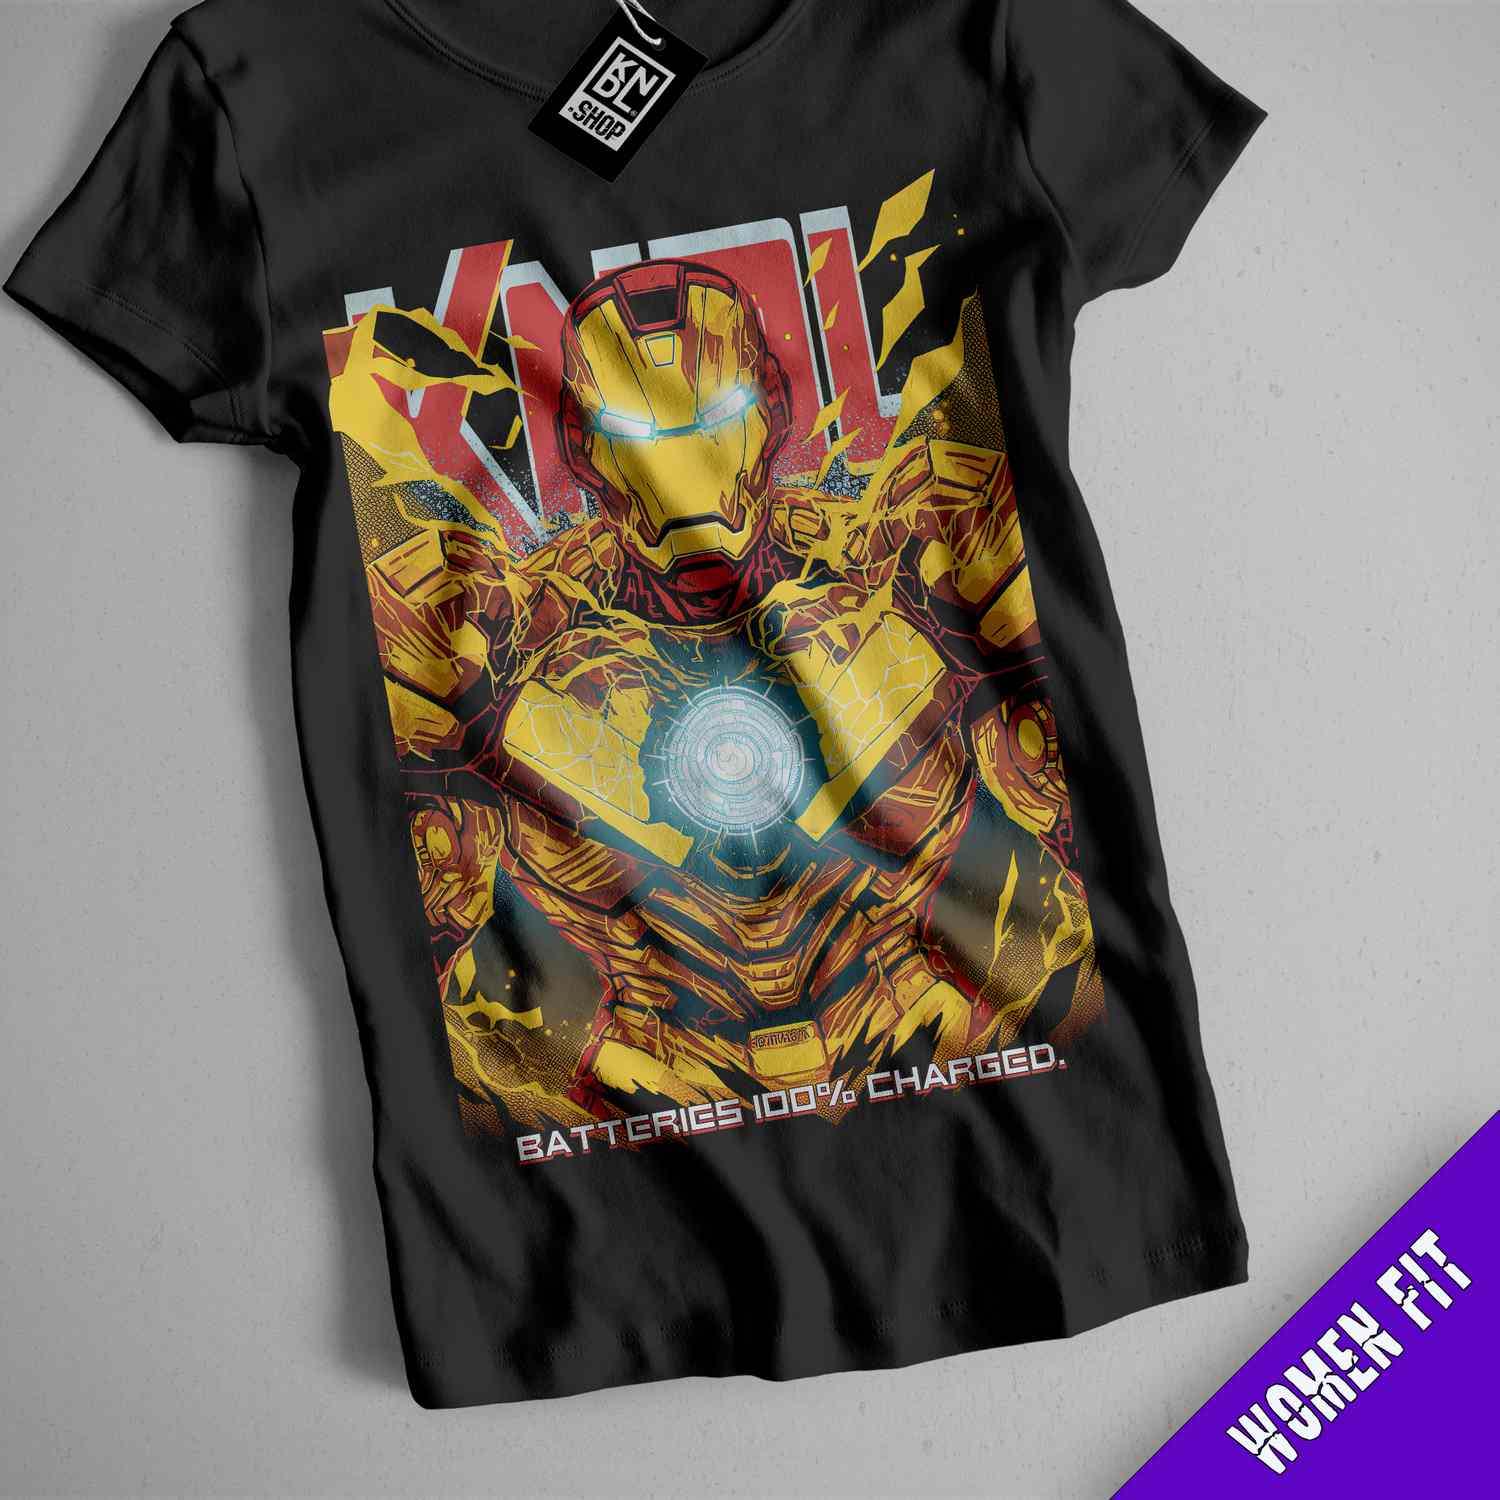 a t - shirt with a picture of iron man on it